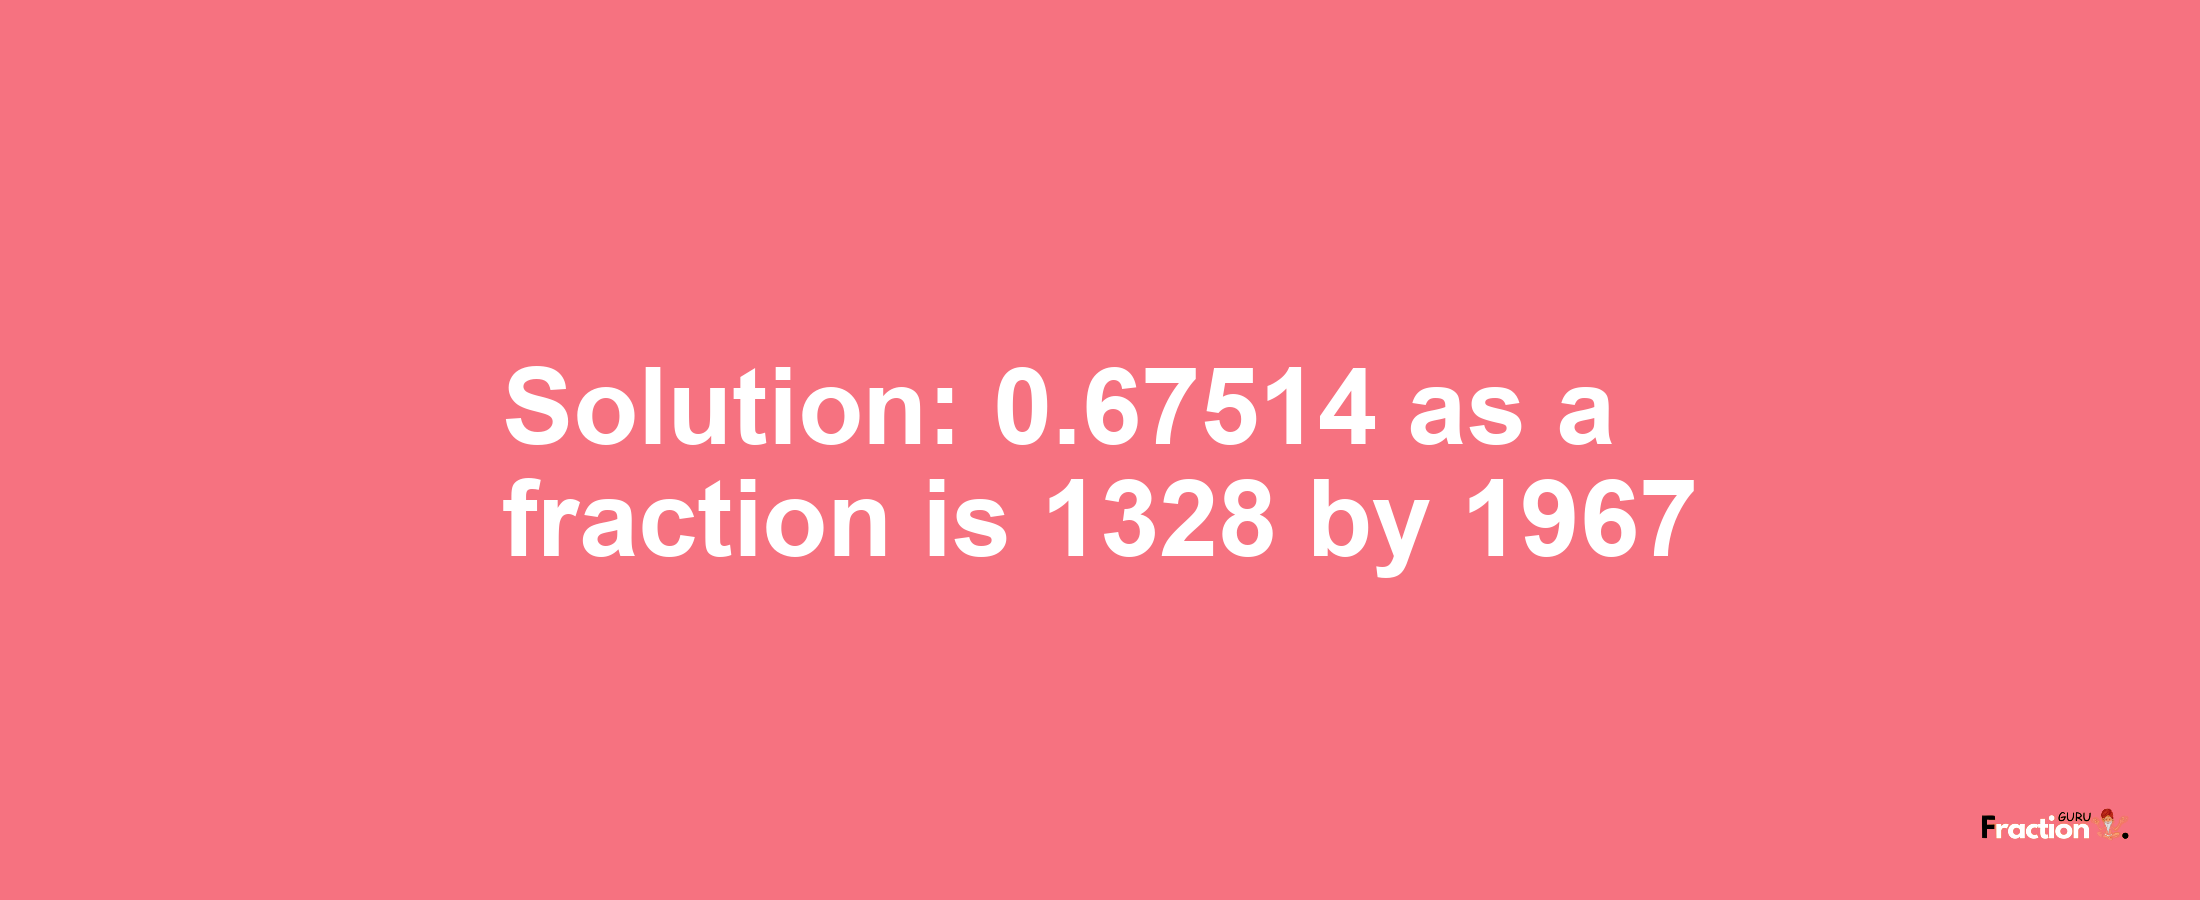 Solution:0.67514 as a fraction is 1328/1967